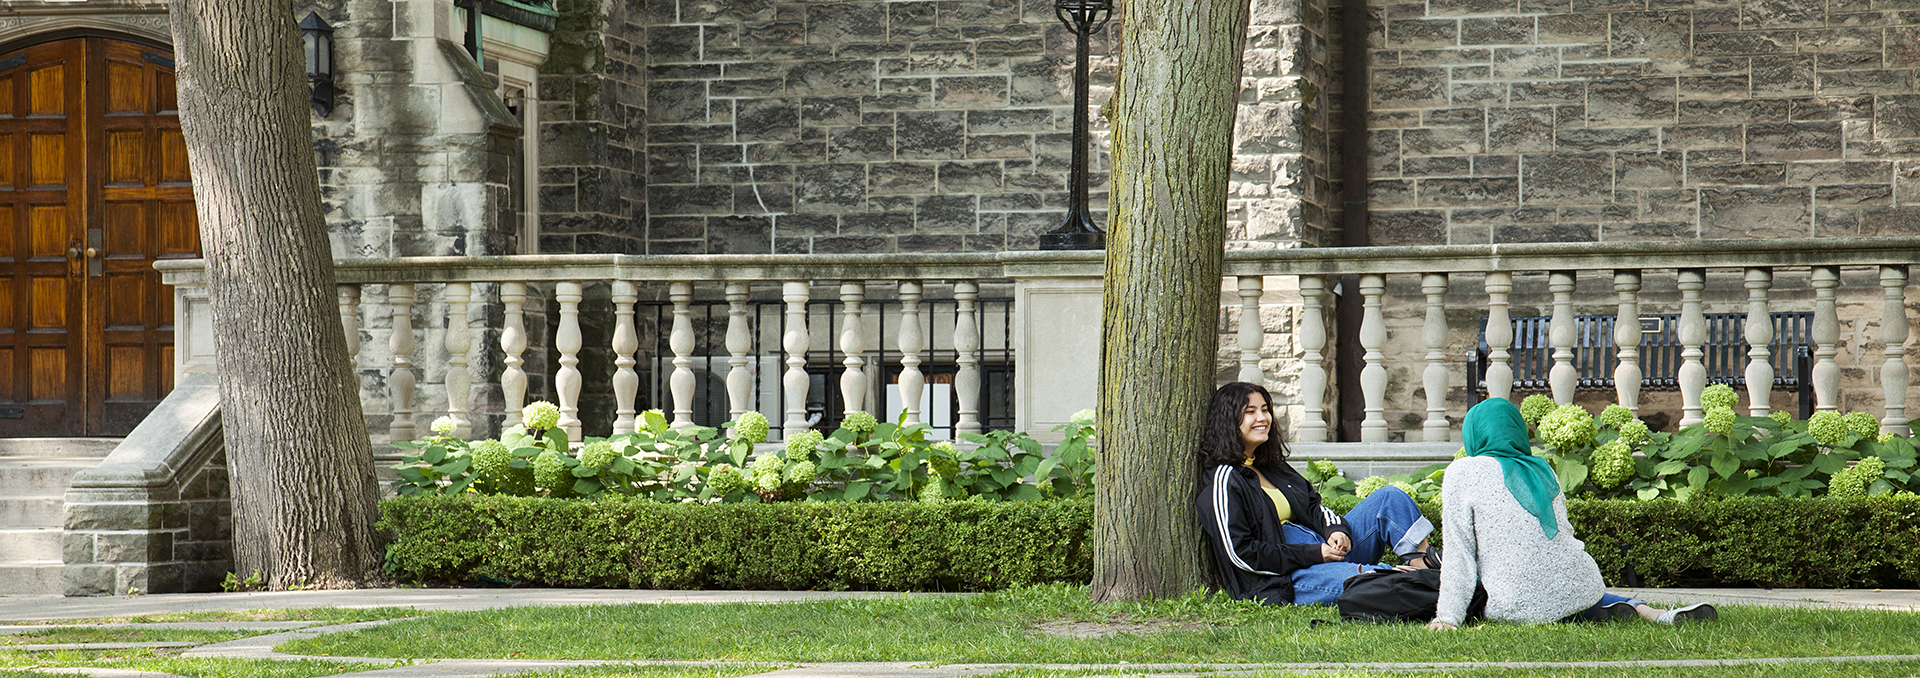 Two students sitting on grass in the Quad